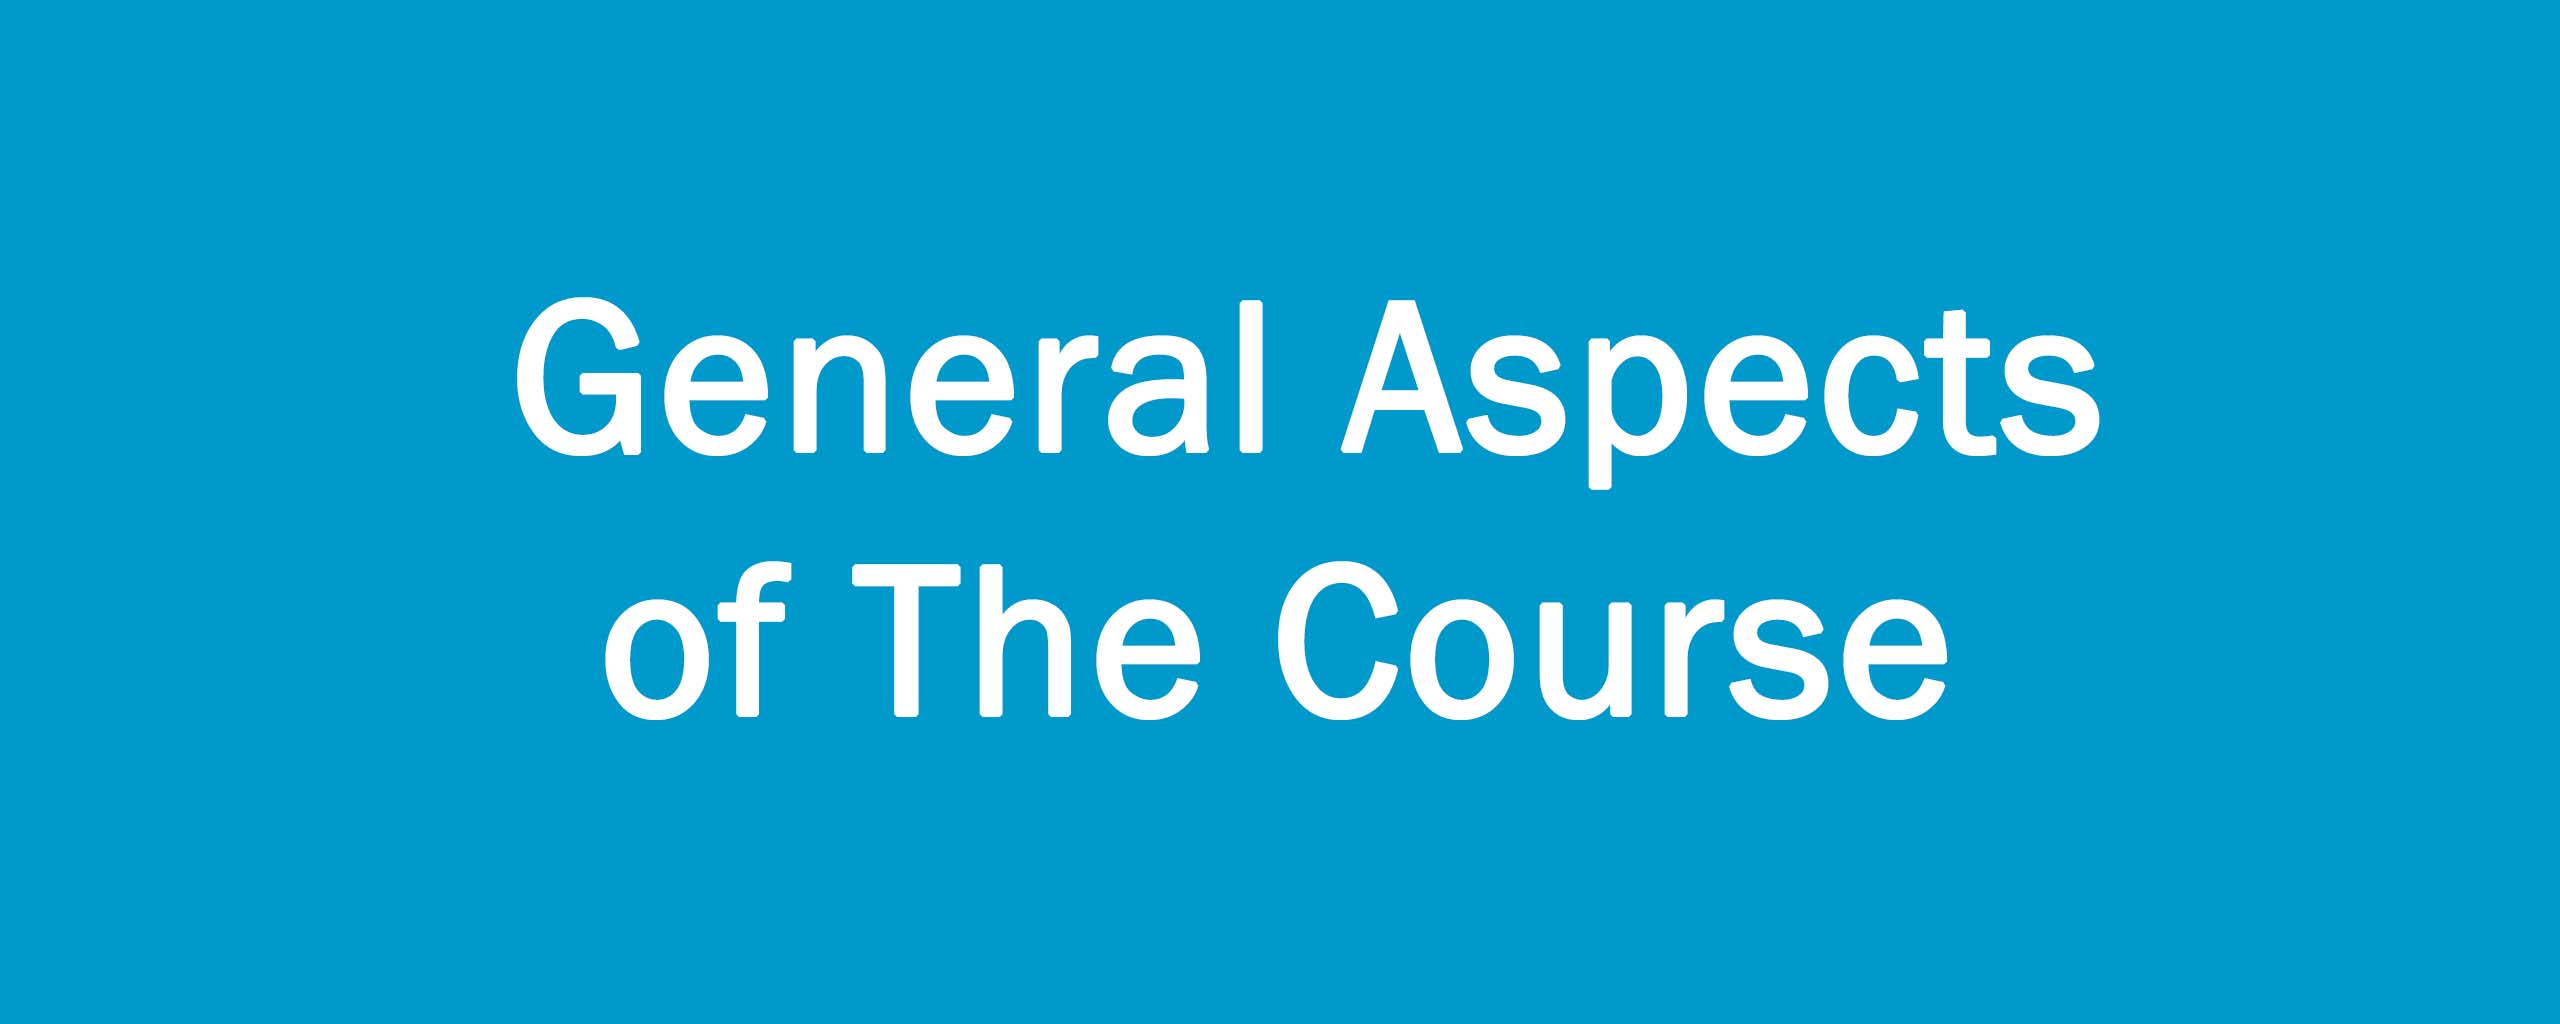 General Aspects of The Course 